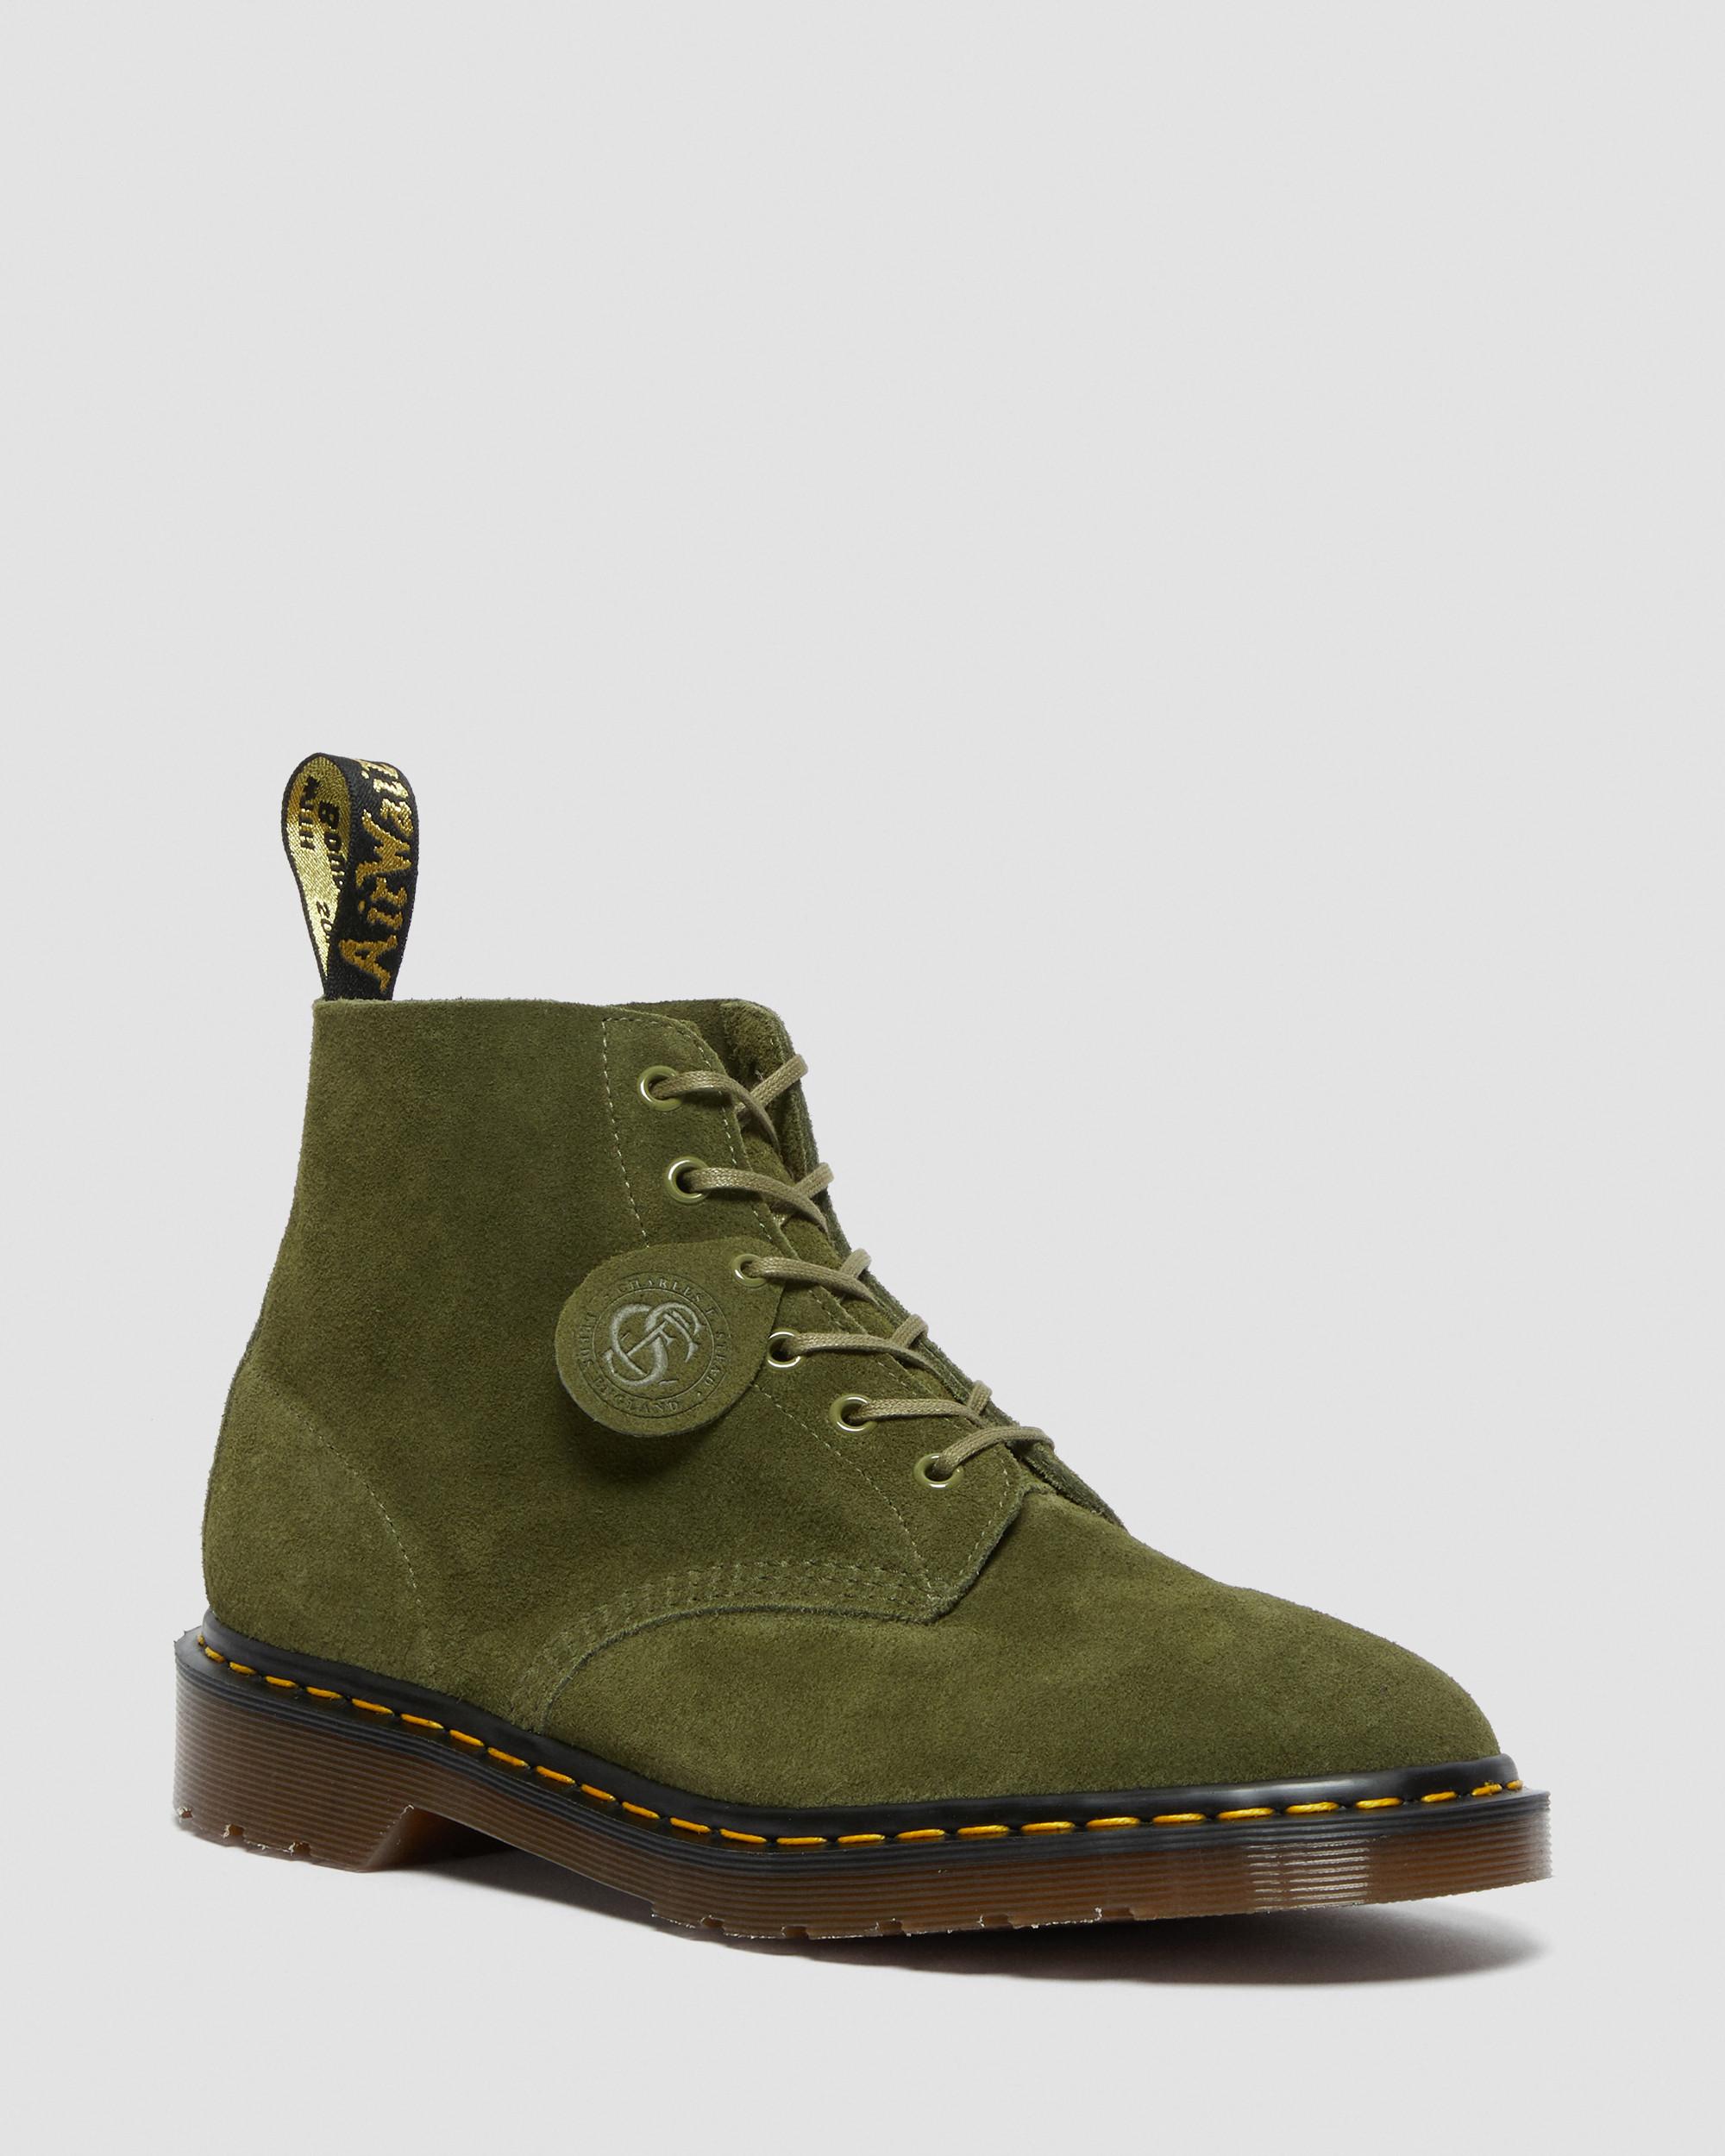 101 Made in England Suede Ankle Boots, Green | Dr. Martens